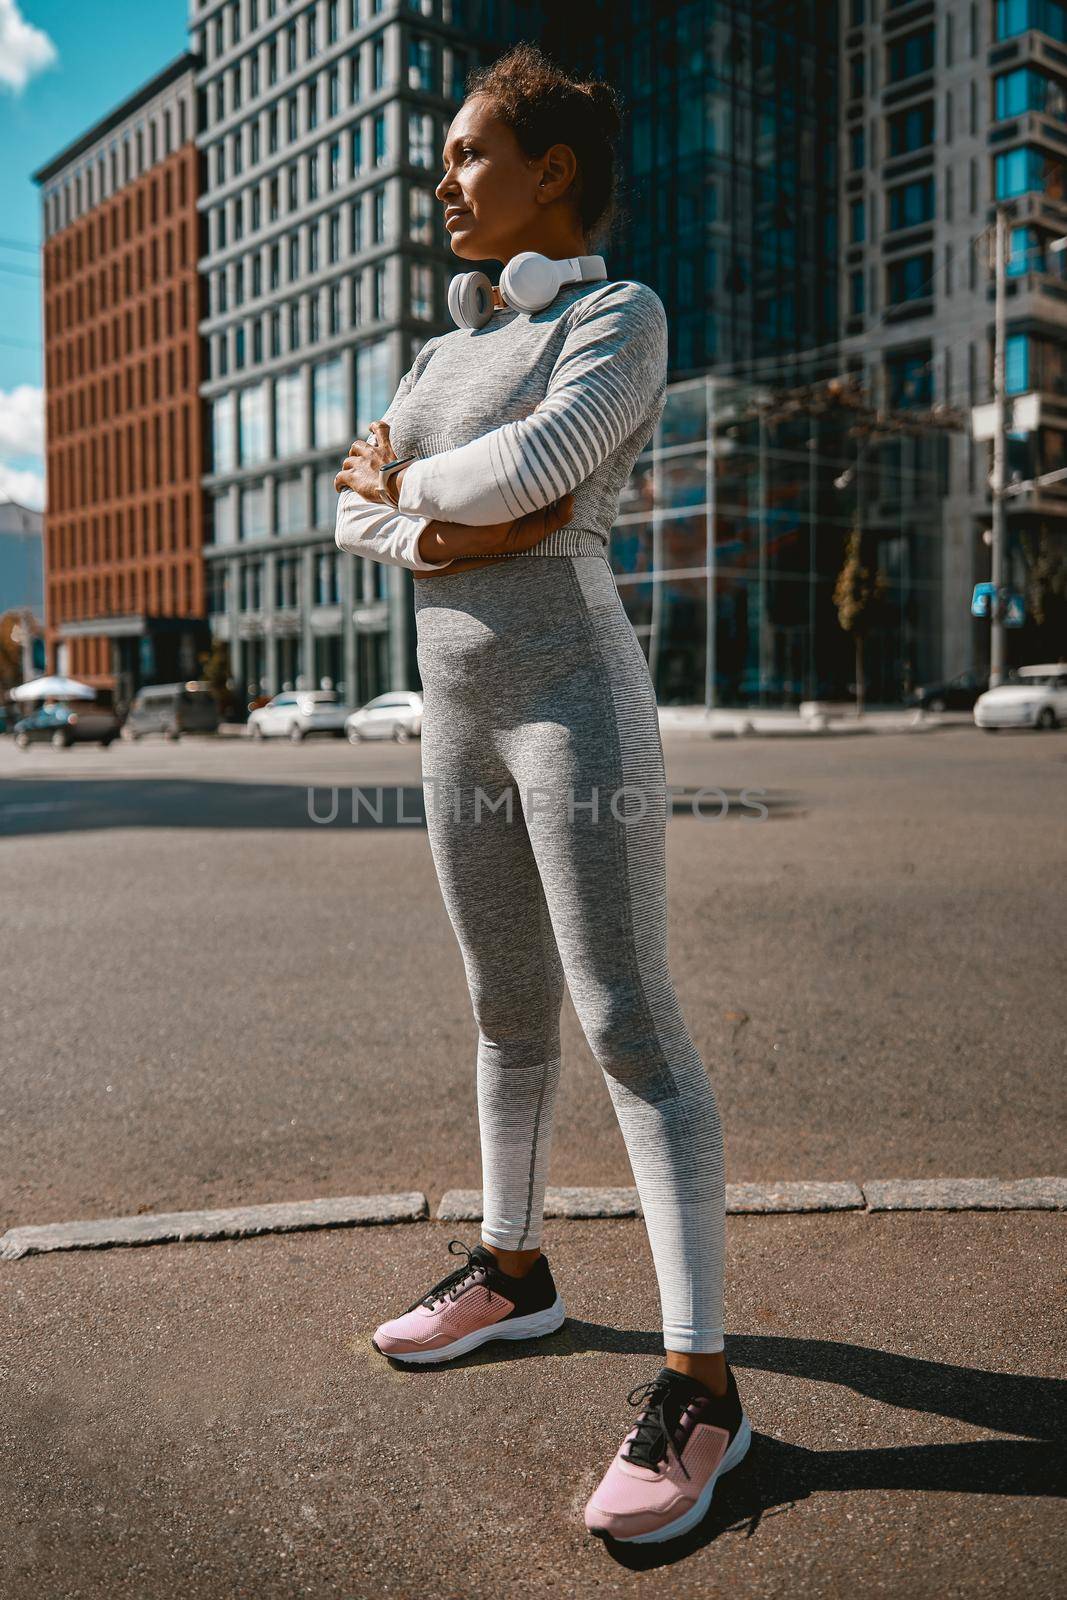 Sportswoman looking away while standing on an urban street. Sports concept